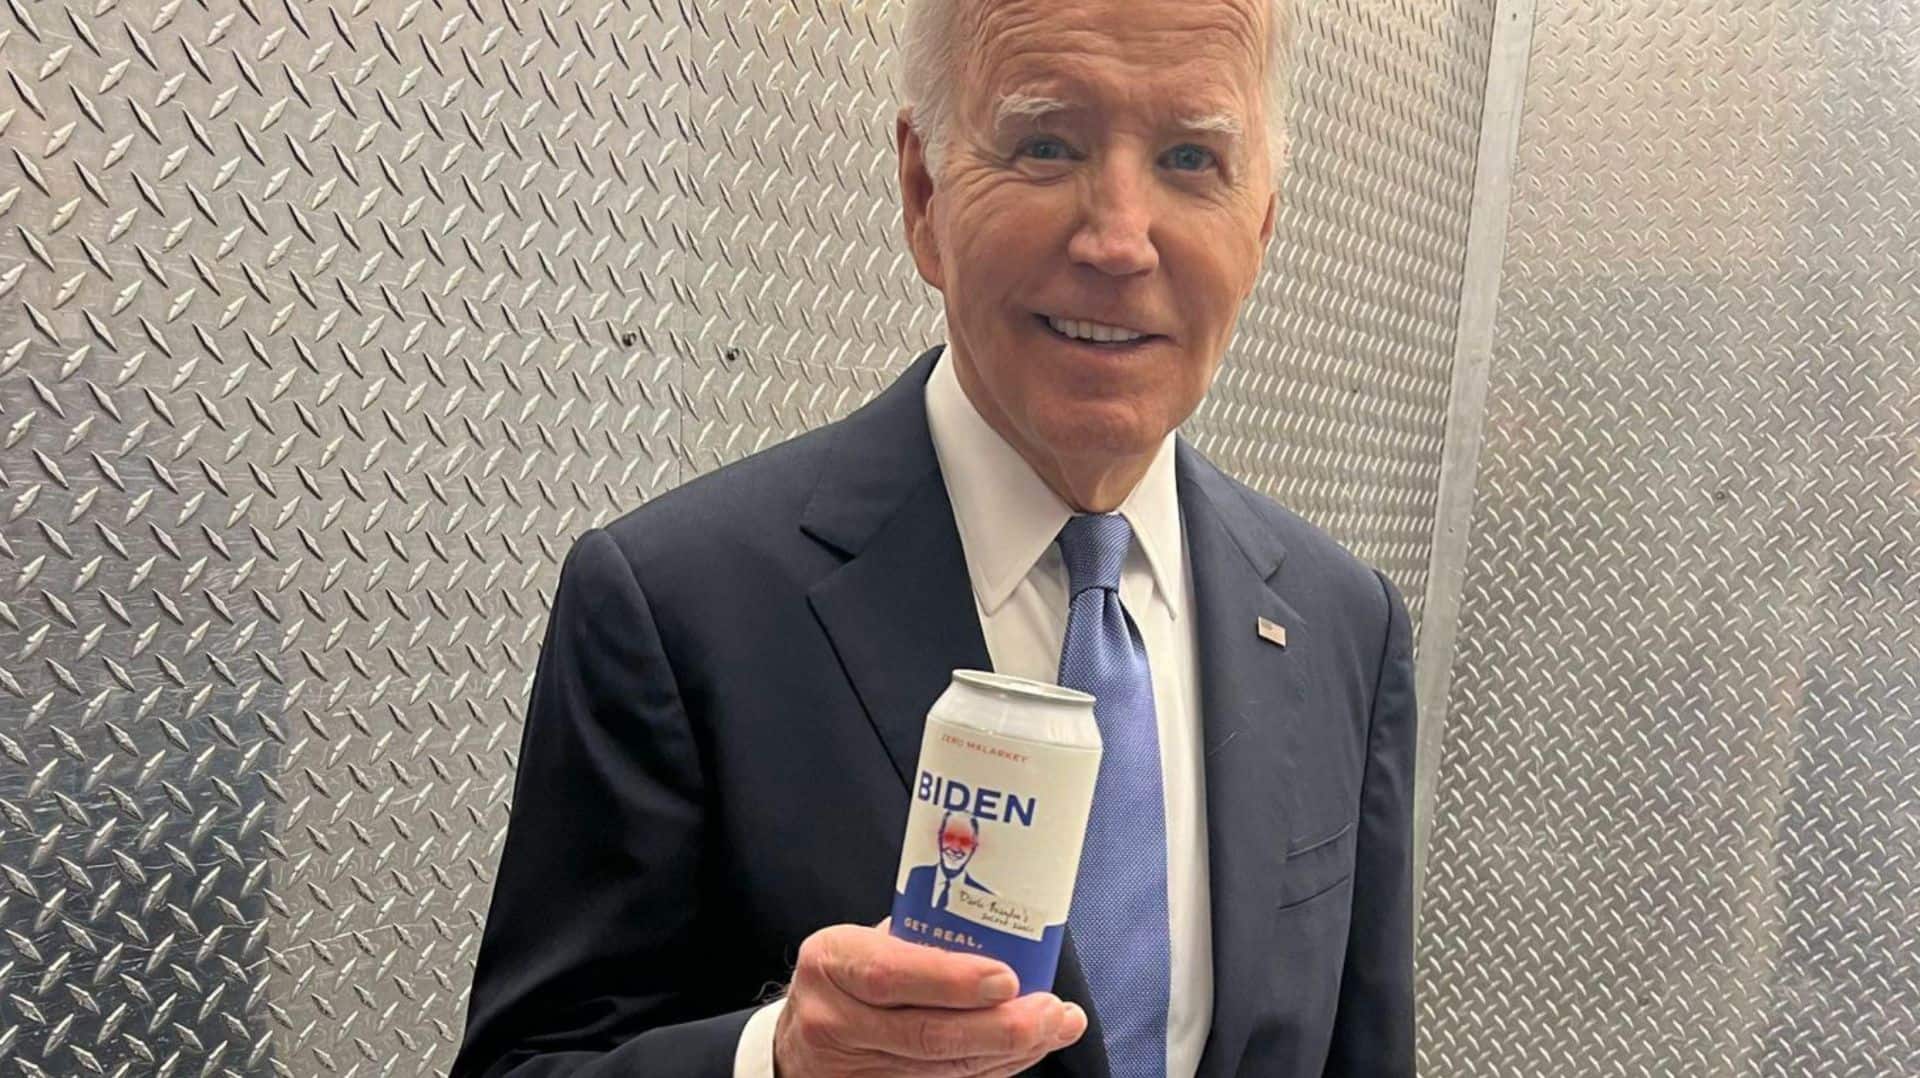 Why did Biden bring 'canned' water to debate with Trump 